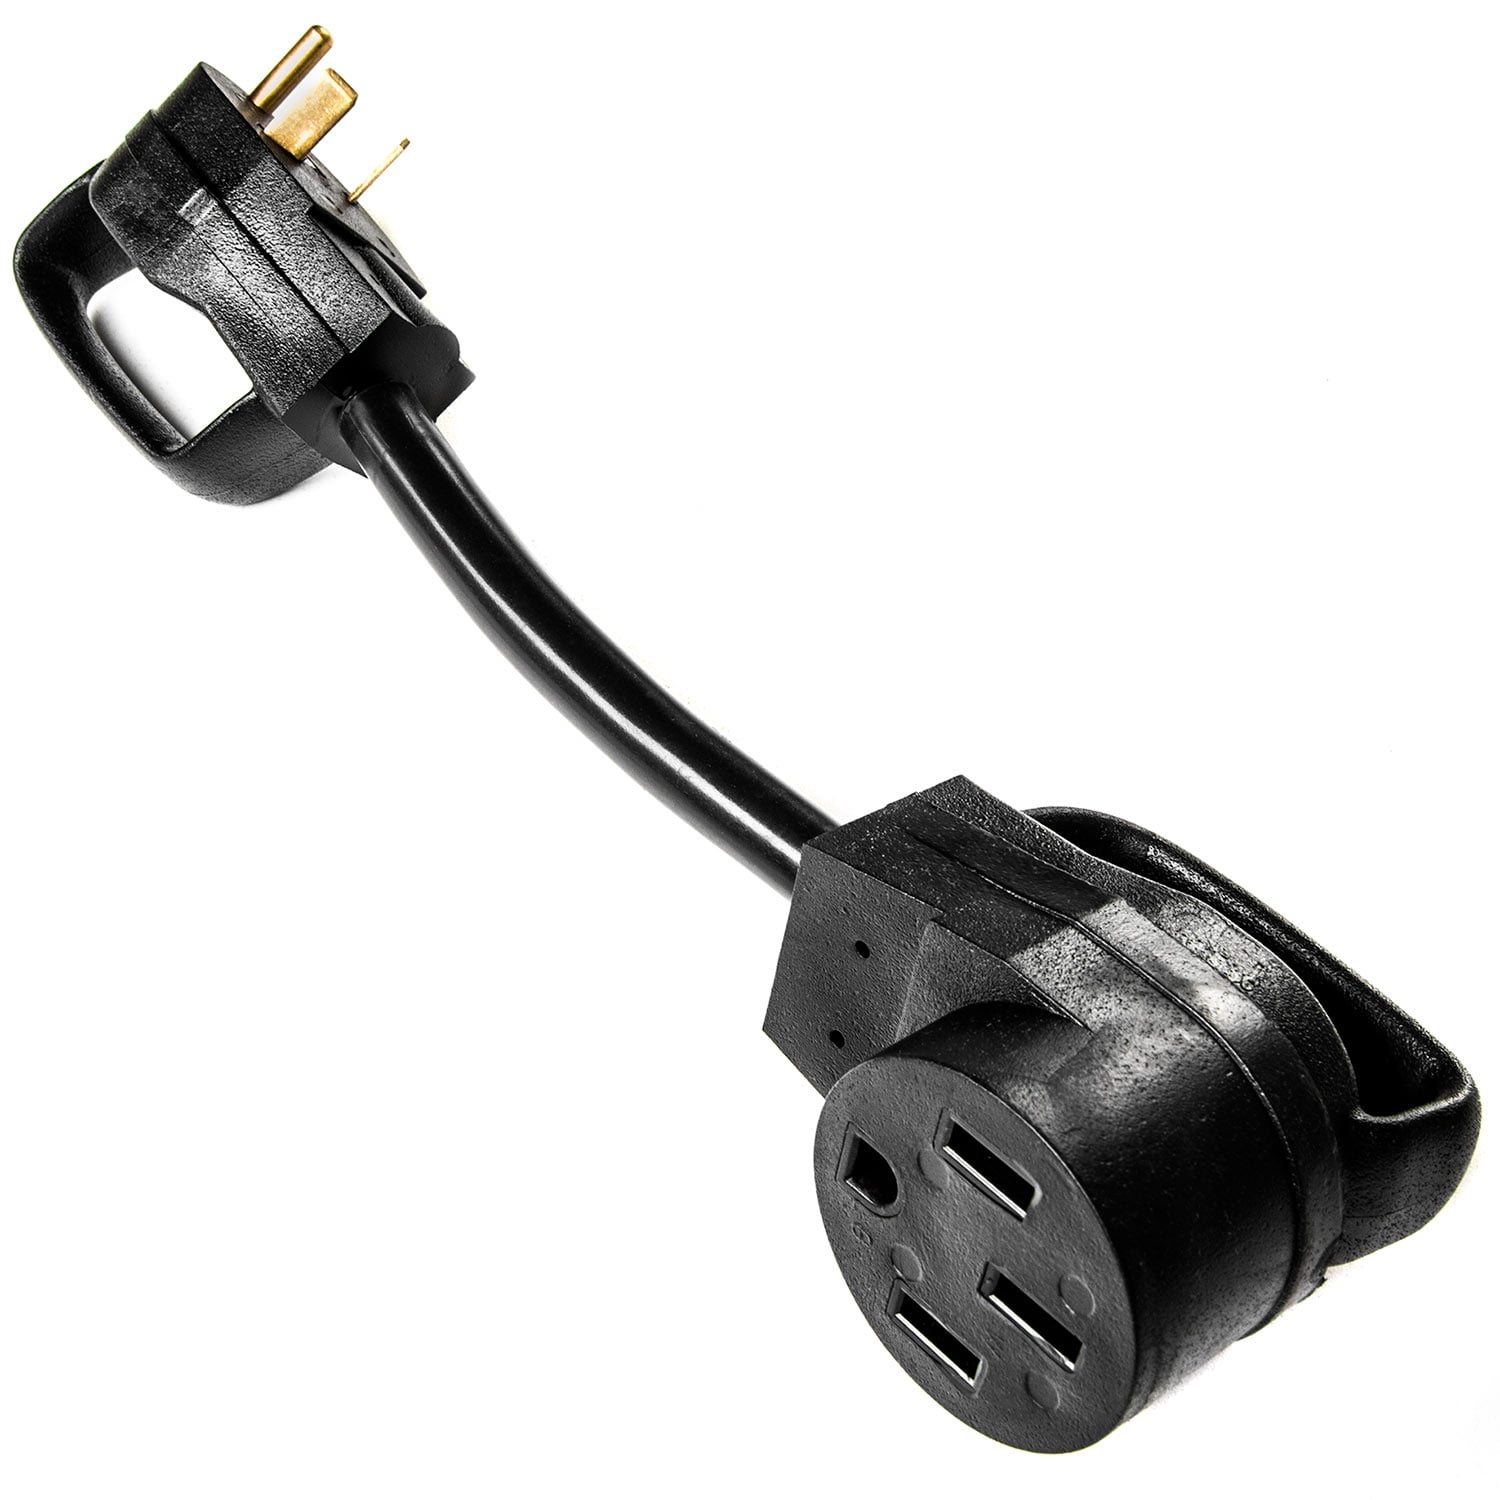 50 amp to 30 amp adapter